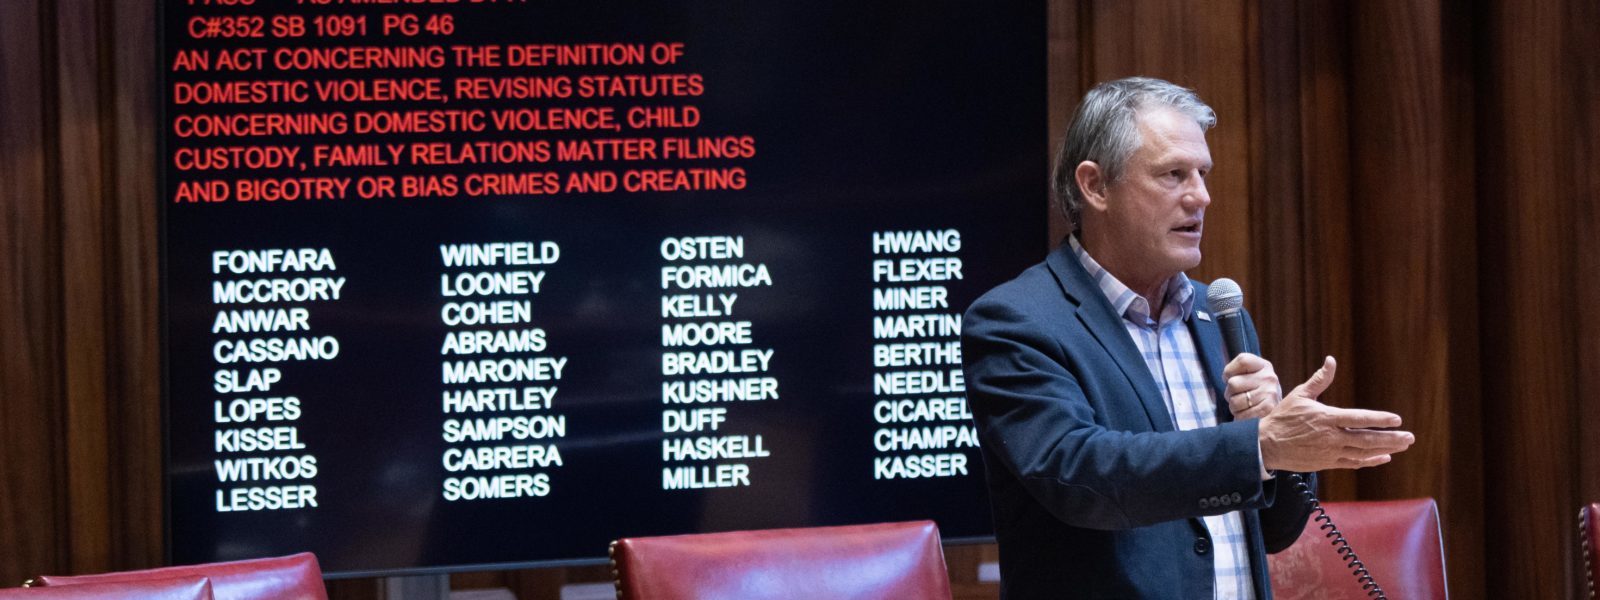 Senator Witkos Votes in Support of Expanded Domestic Violence Proposal